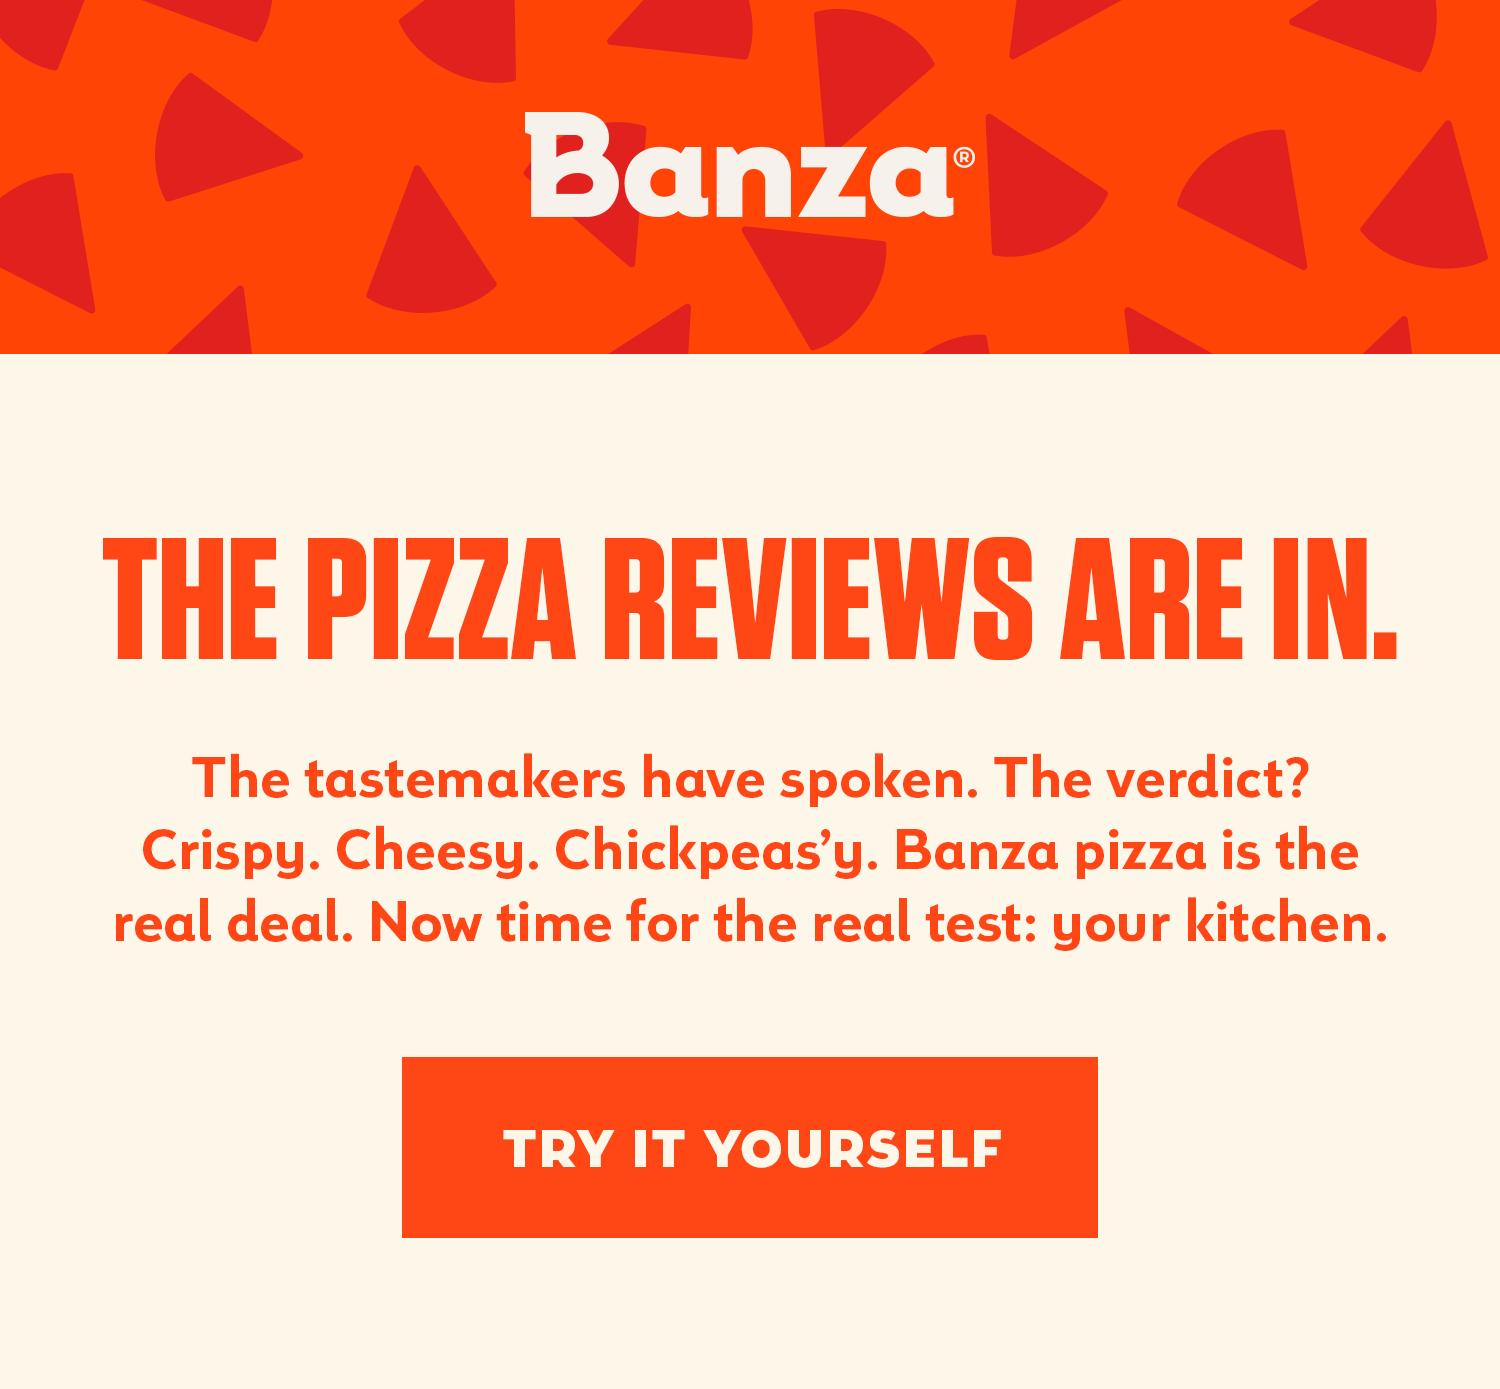 The pizza reviews are in